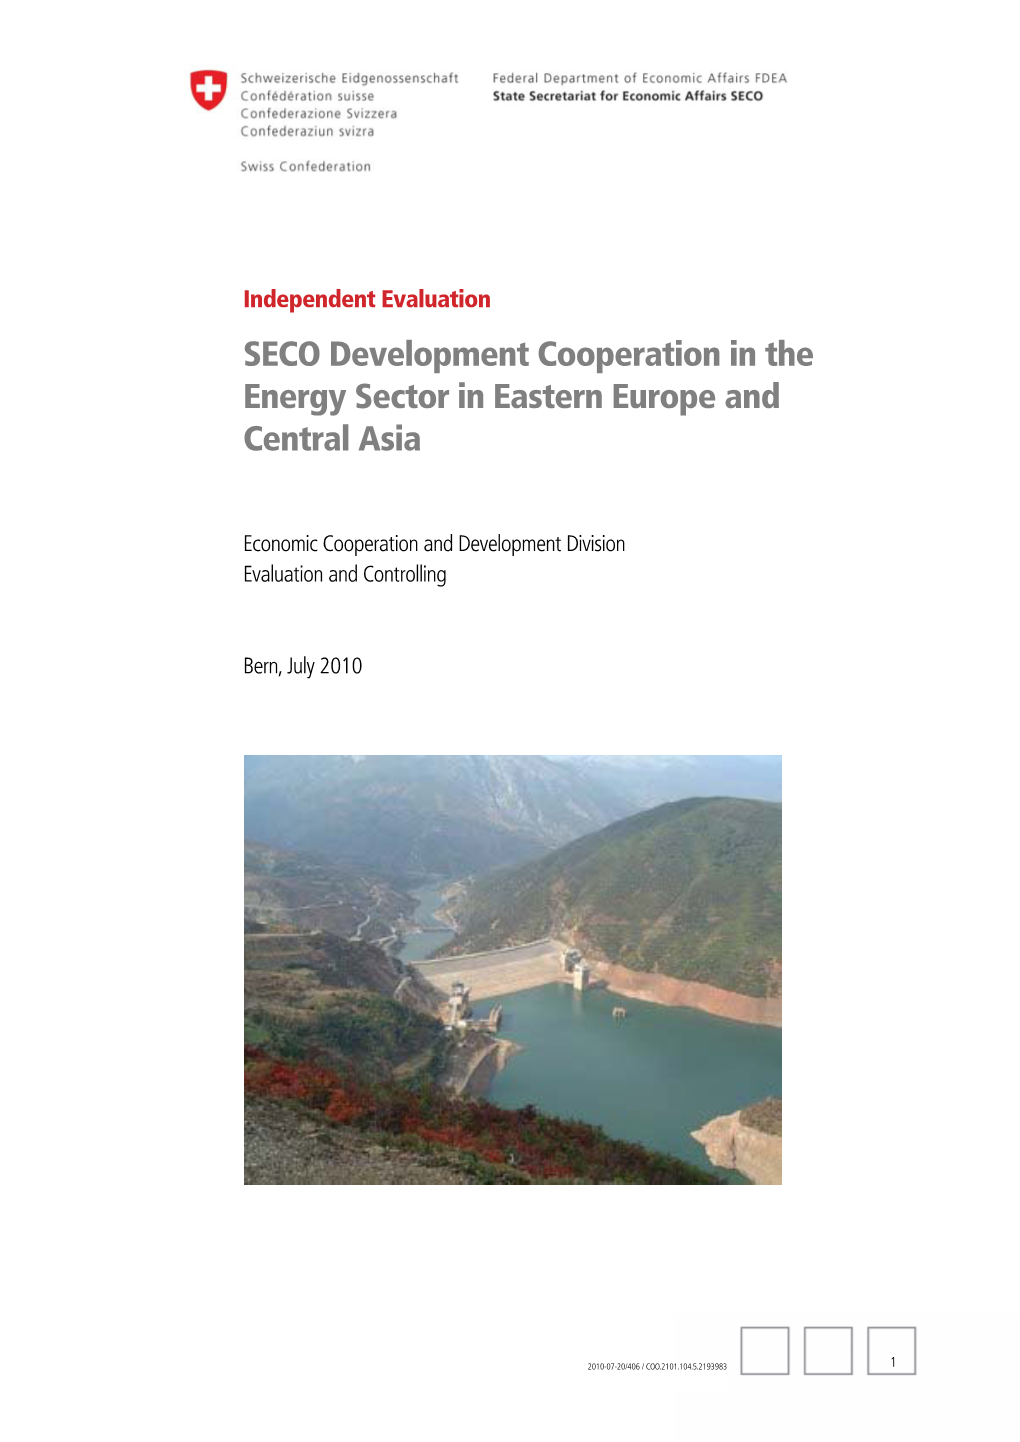 SECO Development Cooperation in the Energy Sector in Eastern Europe and Central Asia